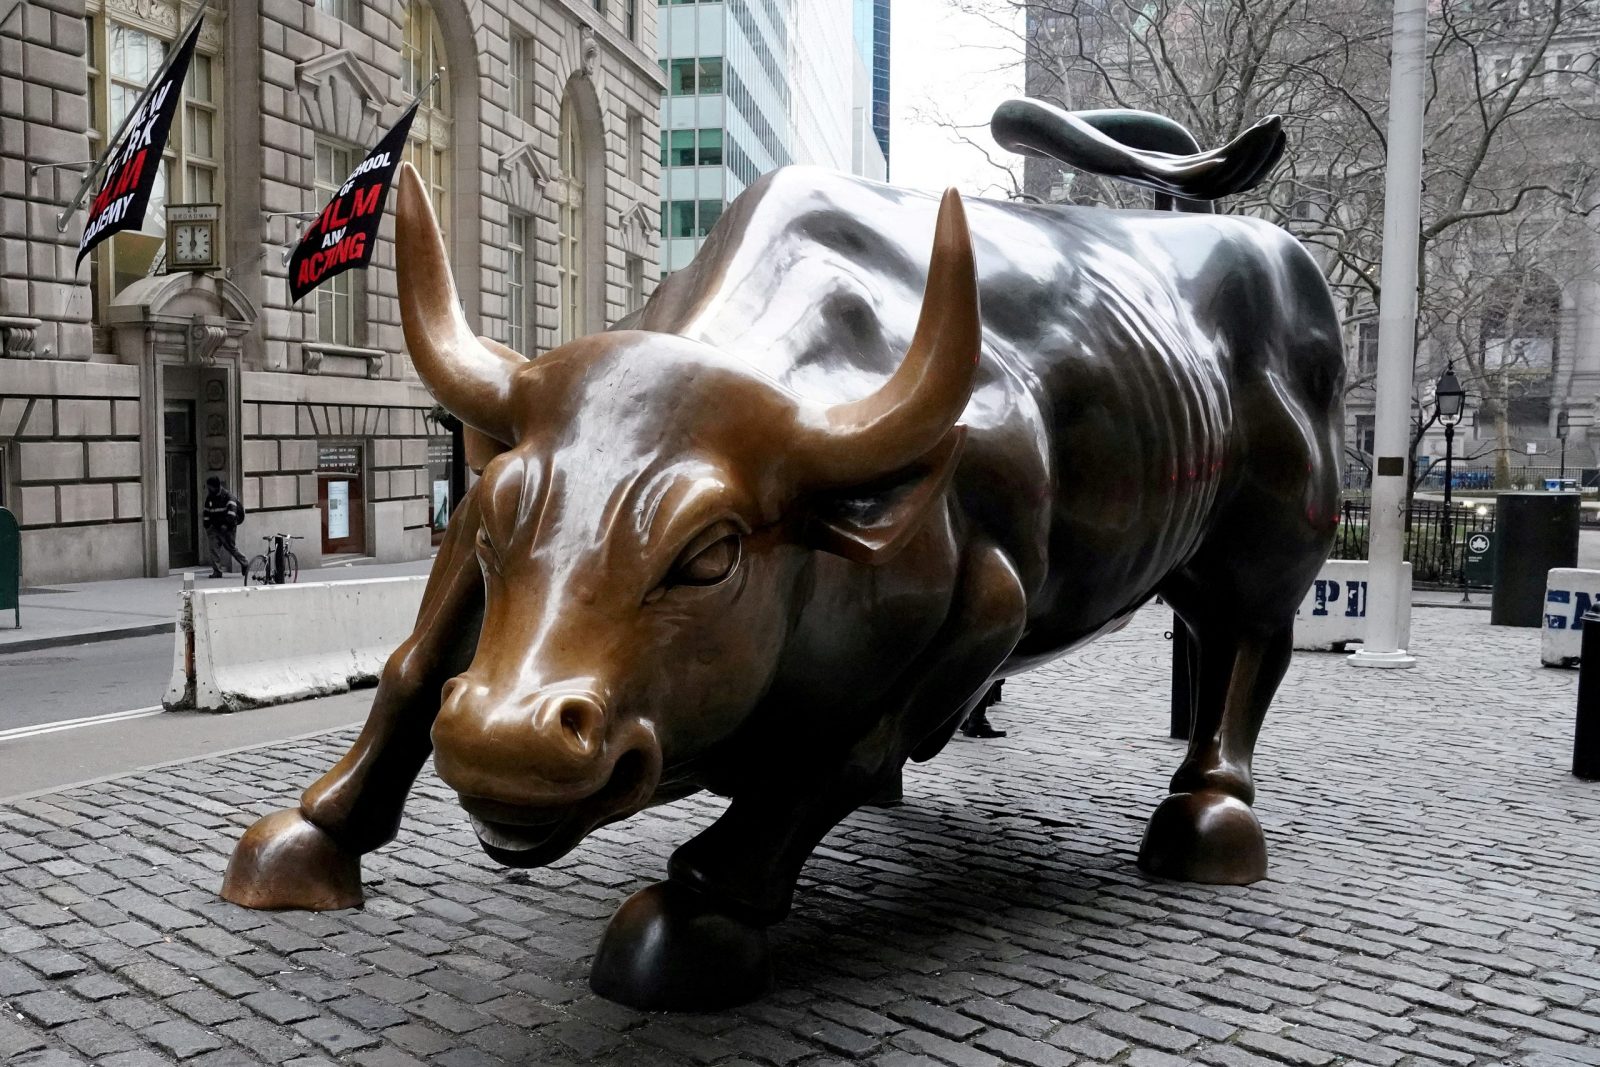 FILE PHOTO: The Charging Bull or Wall Street Bull is pictured in the Manhattan borough of New York City, New York, U.S., January 16, 2019. REUTERS/Carlo Allegri/File Photo/File Photo/File Photo Photo: CARLO ALLEGRI/REUTERS